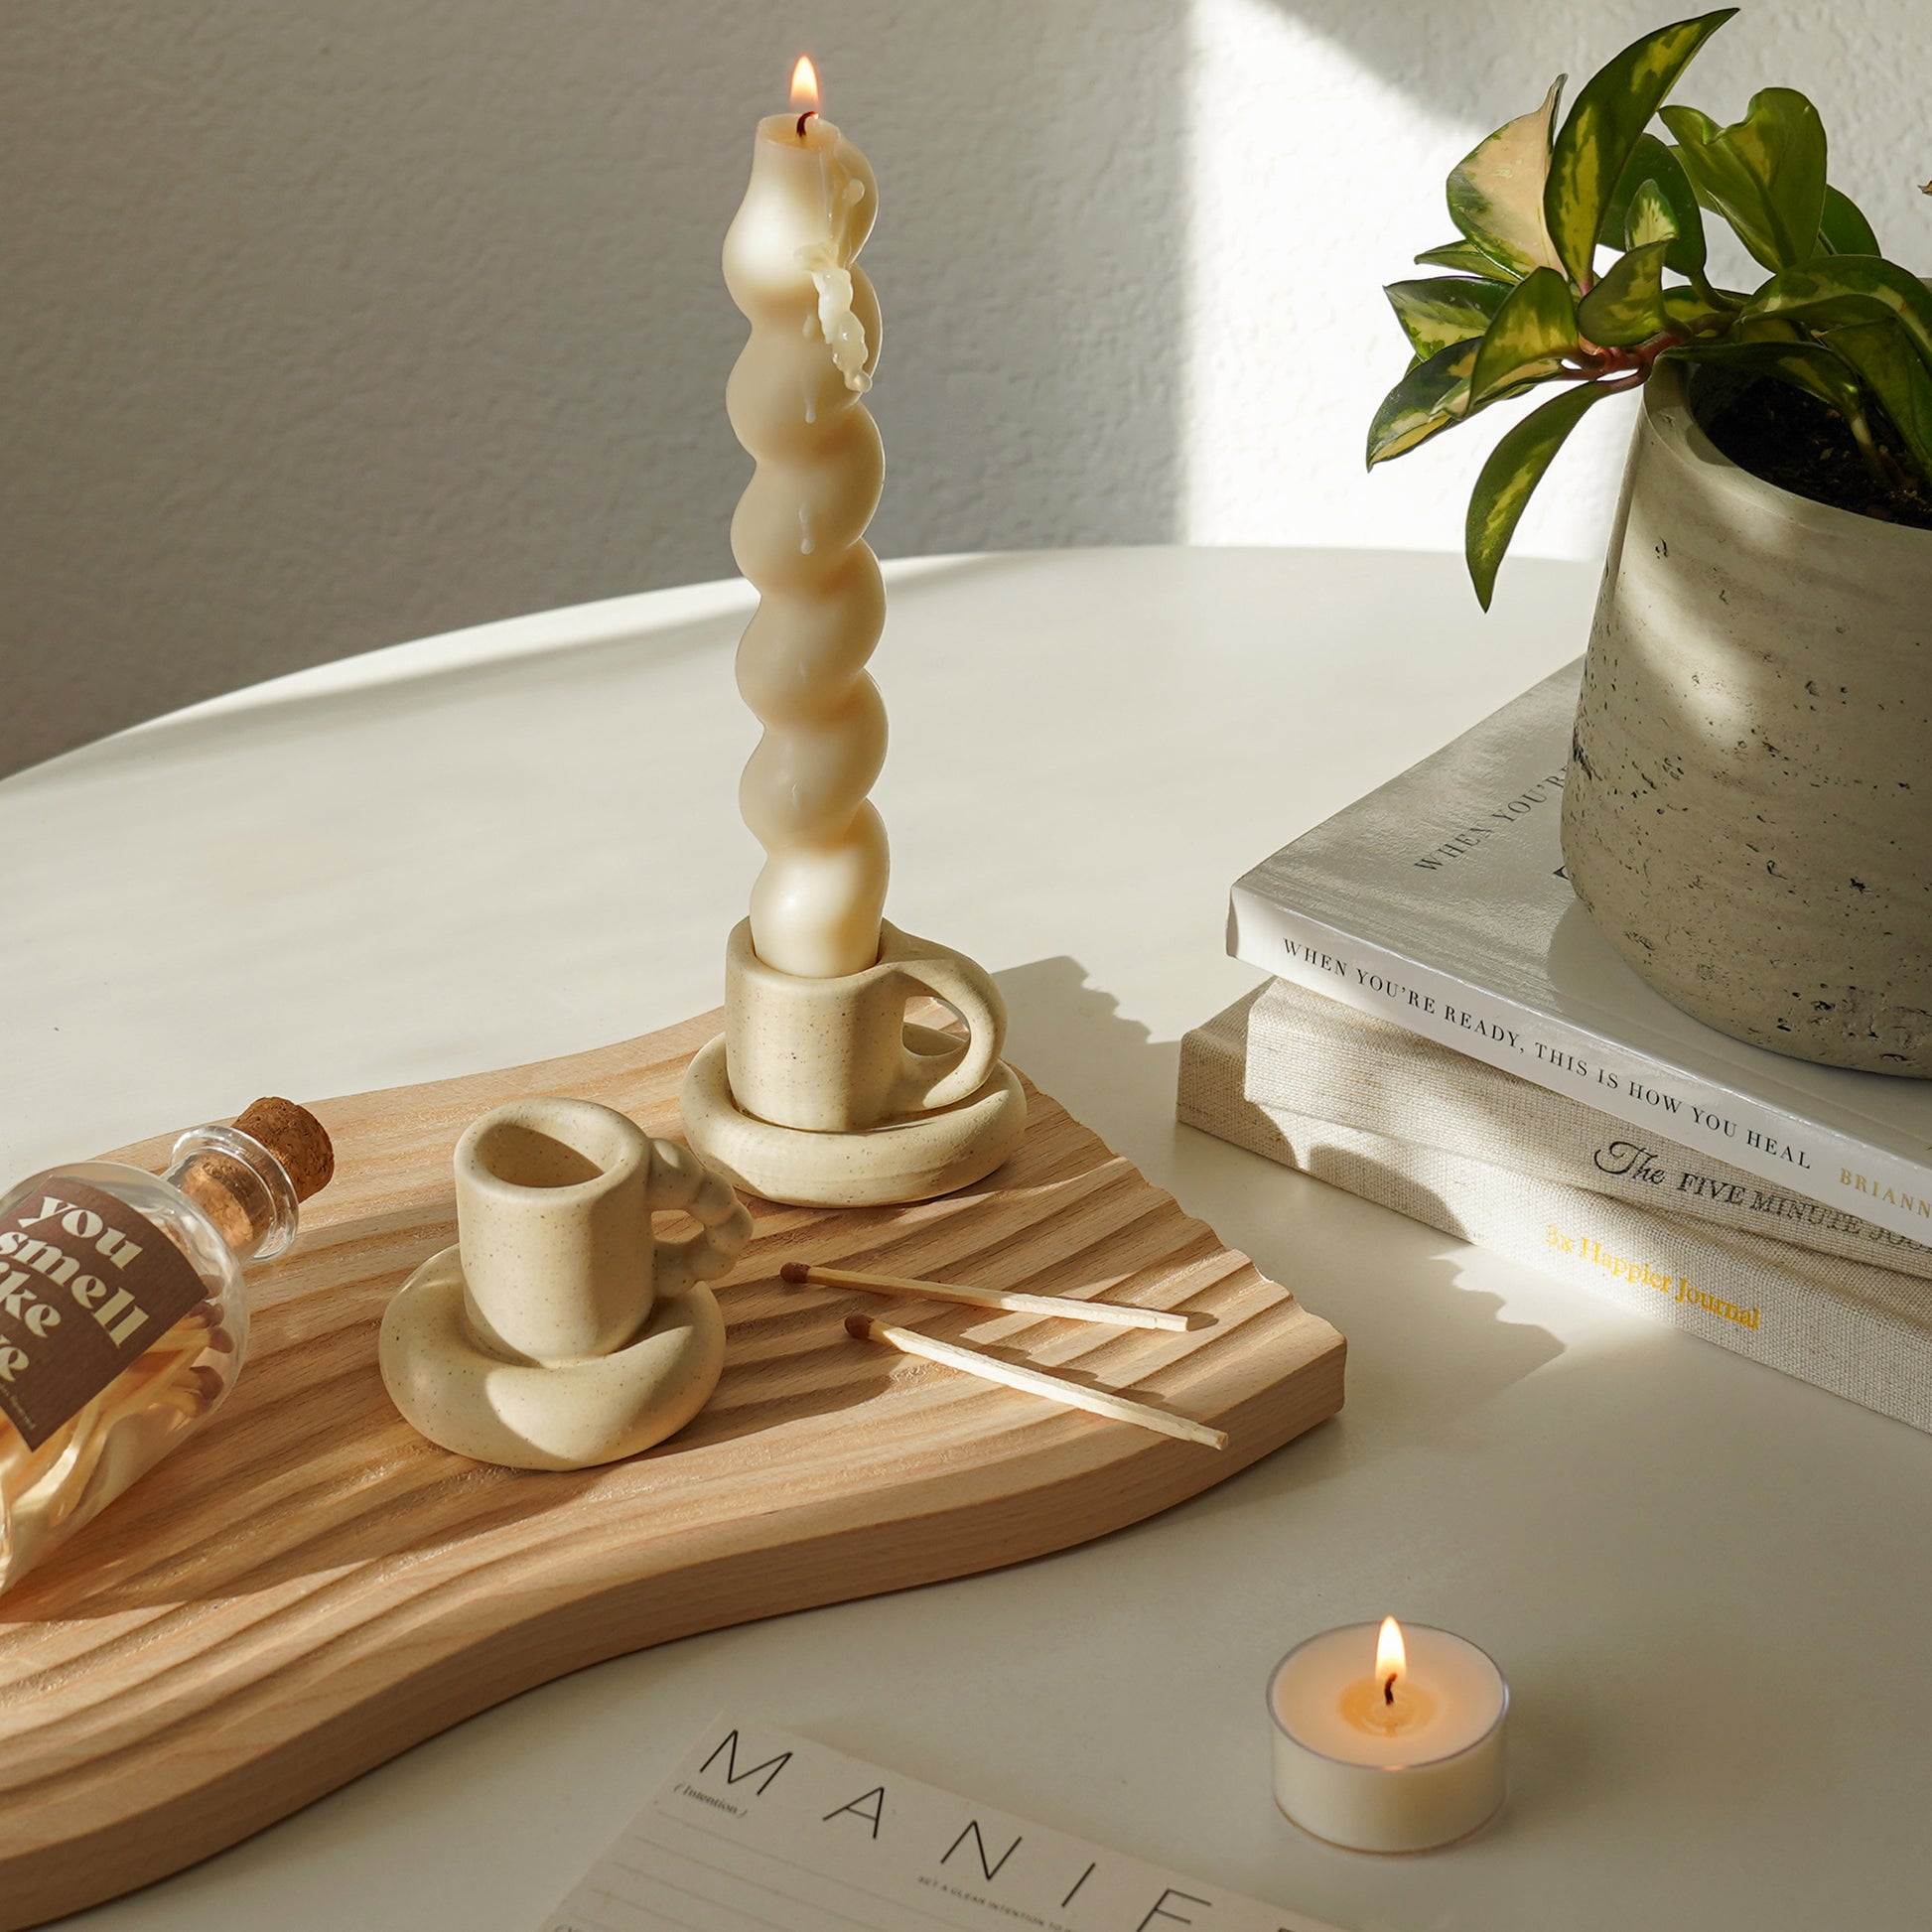 bubble mug candle holder, a wavy candle in a chunky mug candle holder, matches, and a match bottle with a brown sticker inscribed with you smell like love on carved wave wooden tray, a lit tealight candle, manifestation note, and plant pot placed on books on the white round table